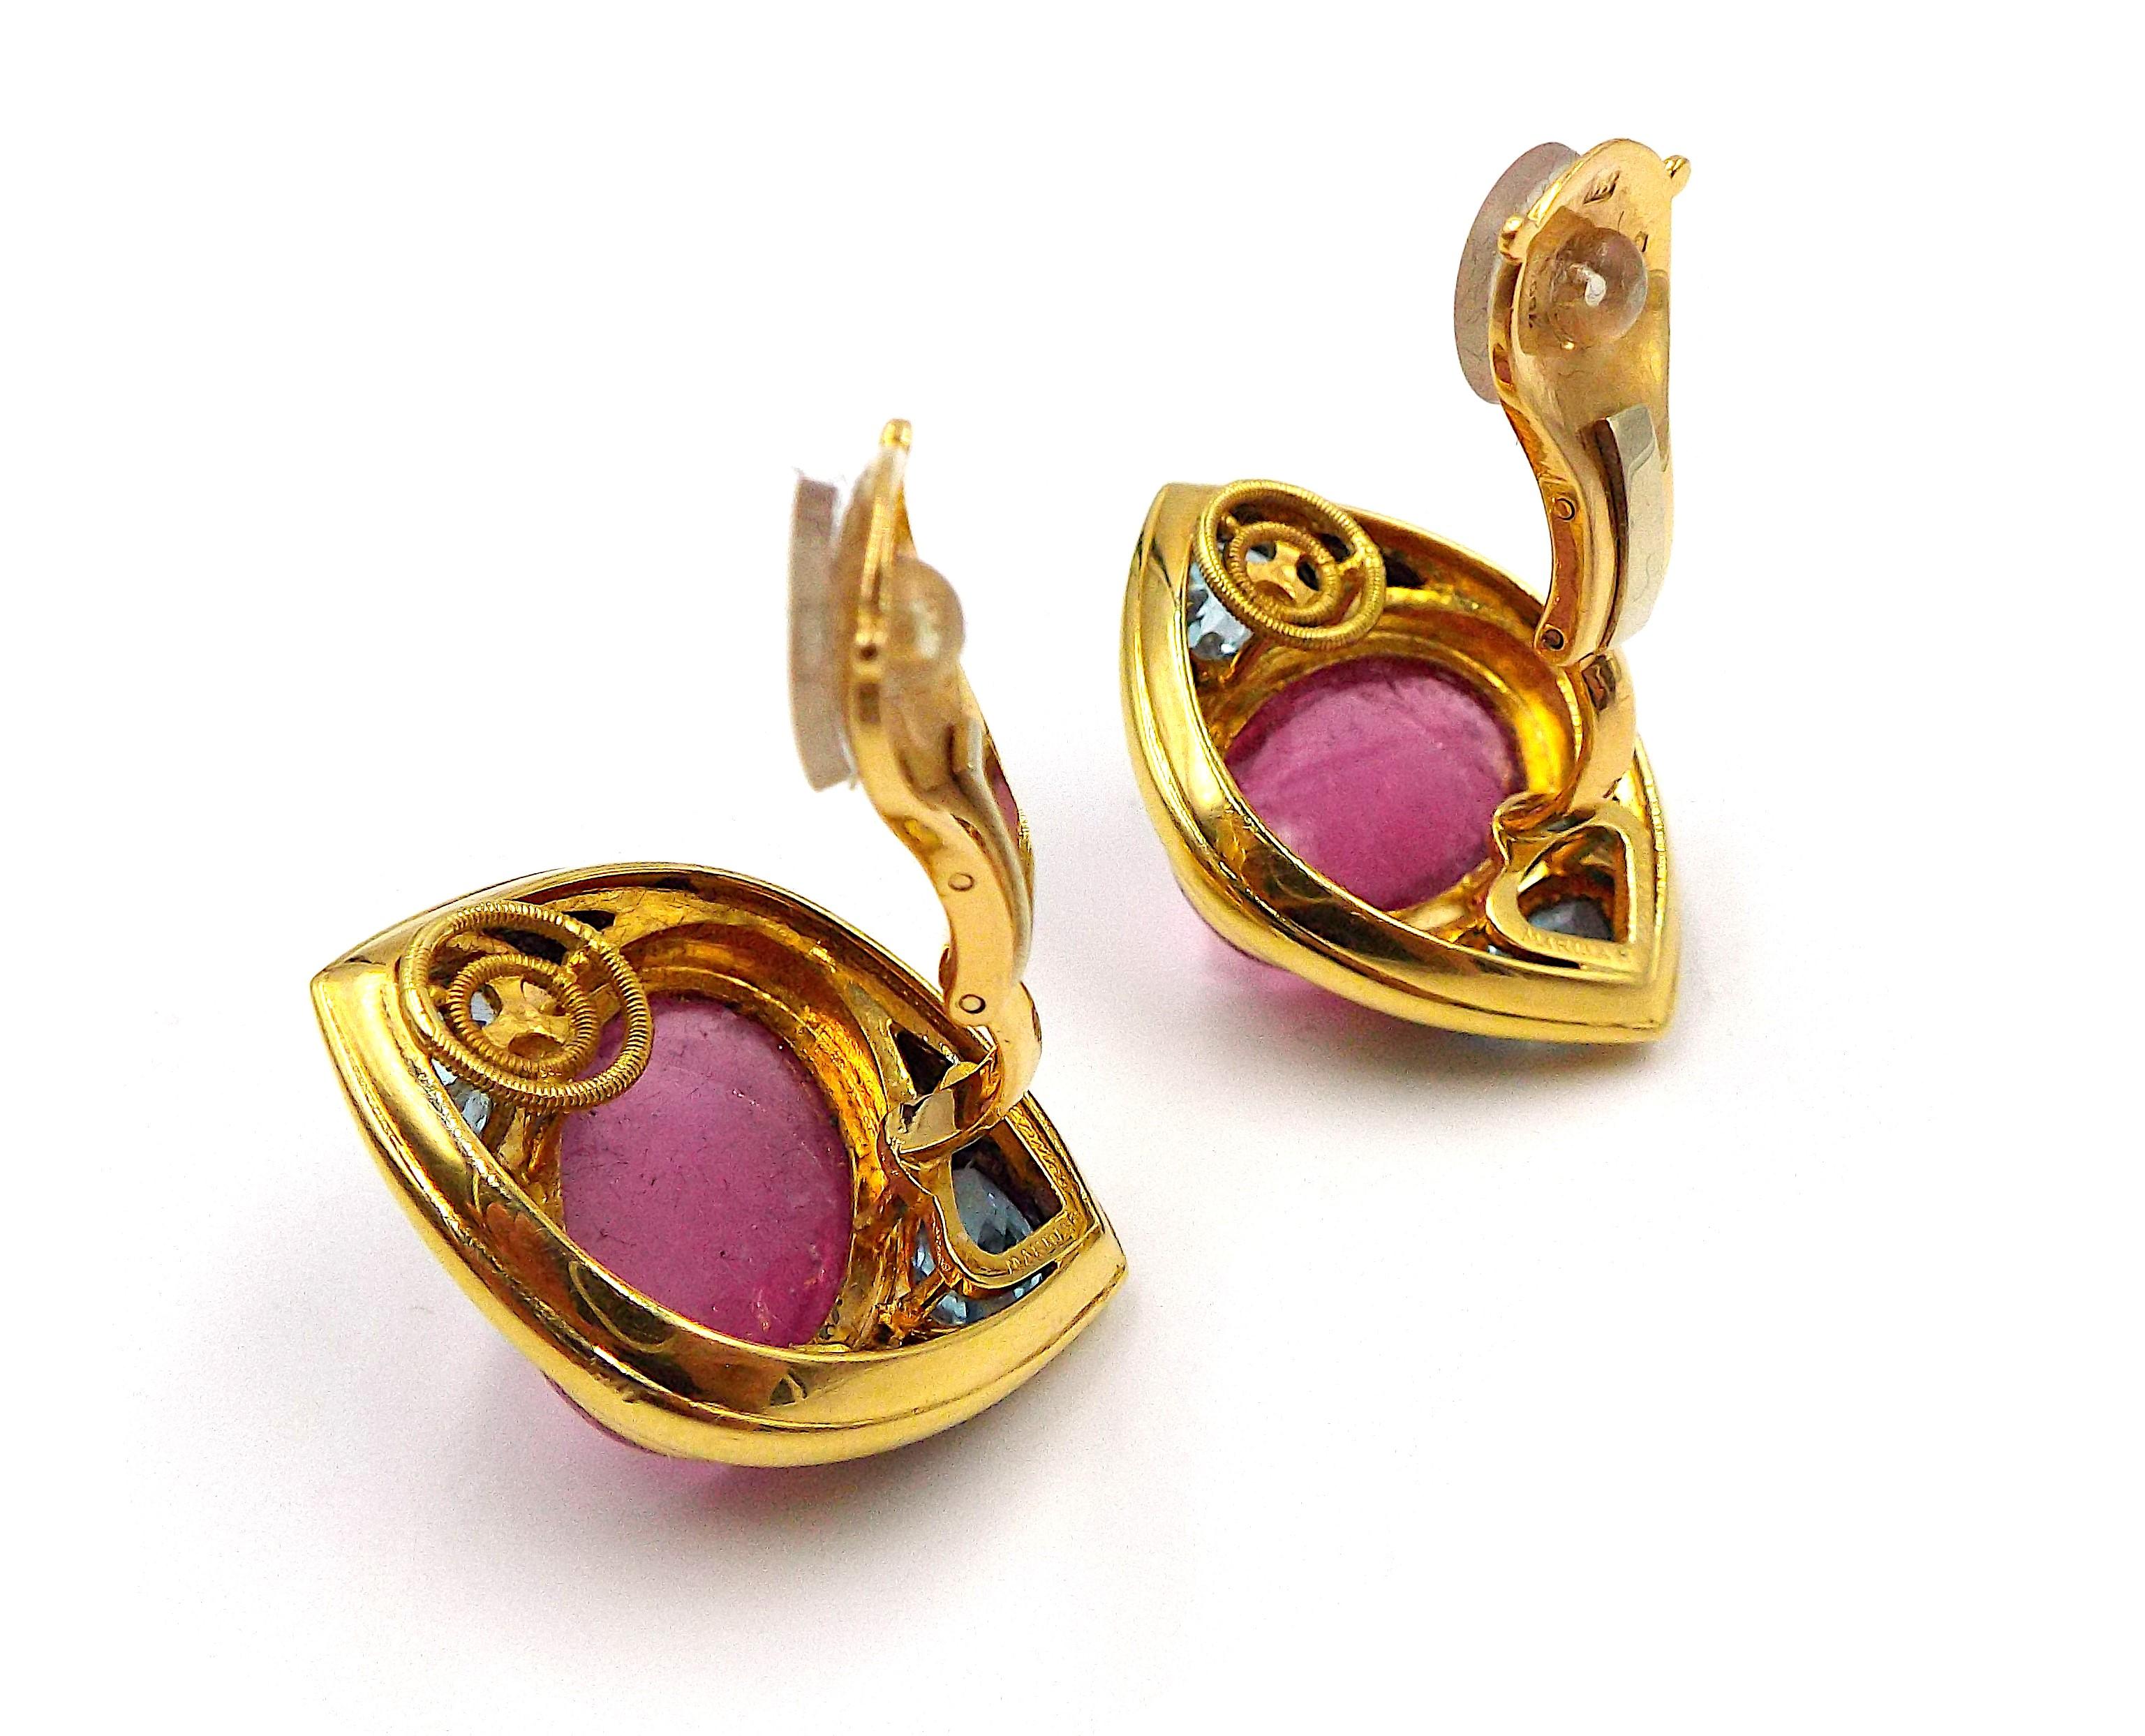 A pair of fancy earrings by Marina B. 18K Yellow Gold, approx. 22ct Pink Tourmaline, approx. 6.8ct Blue Topaz. Signed Marina B, stamped France, 750, numbered.